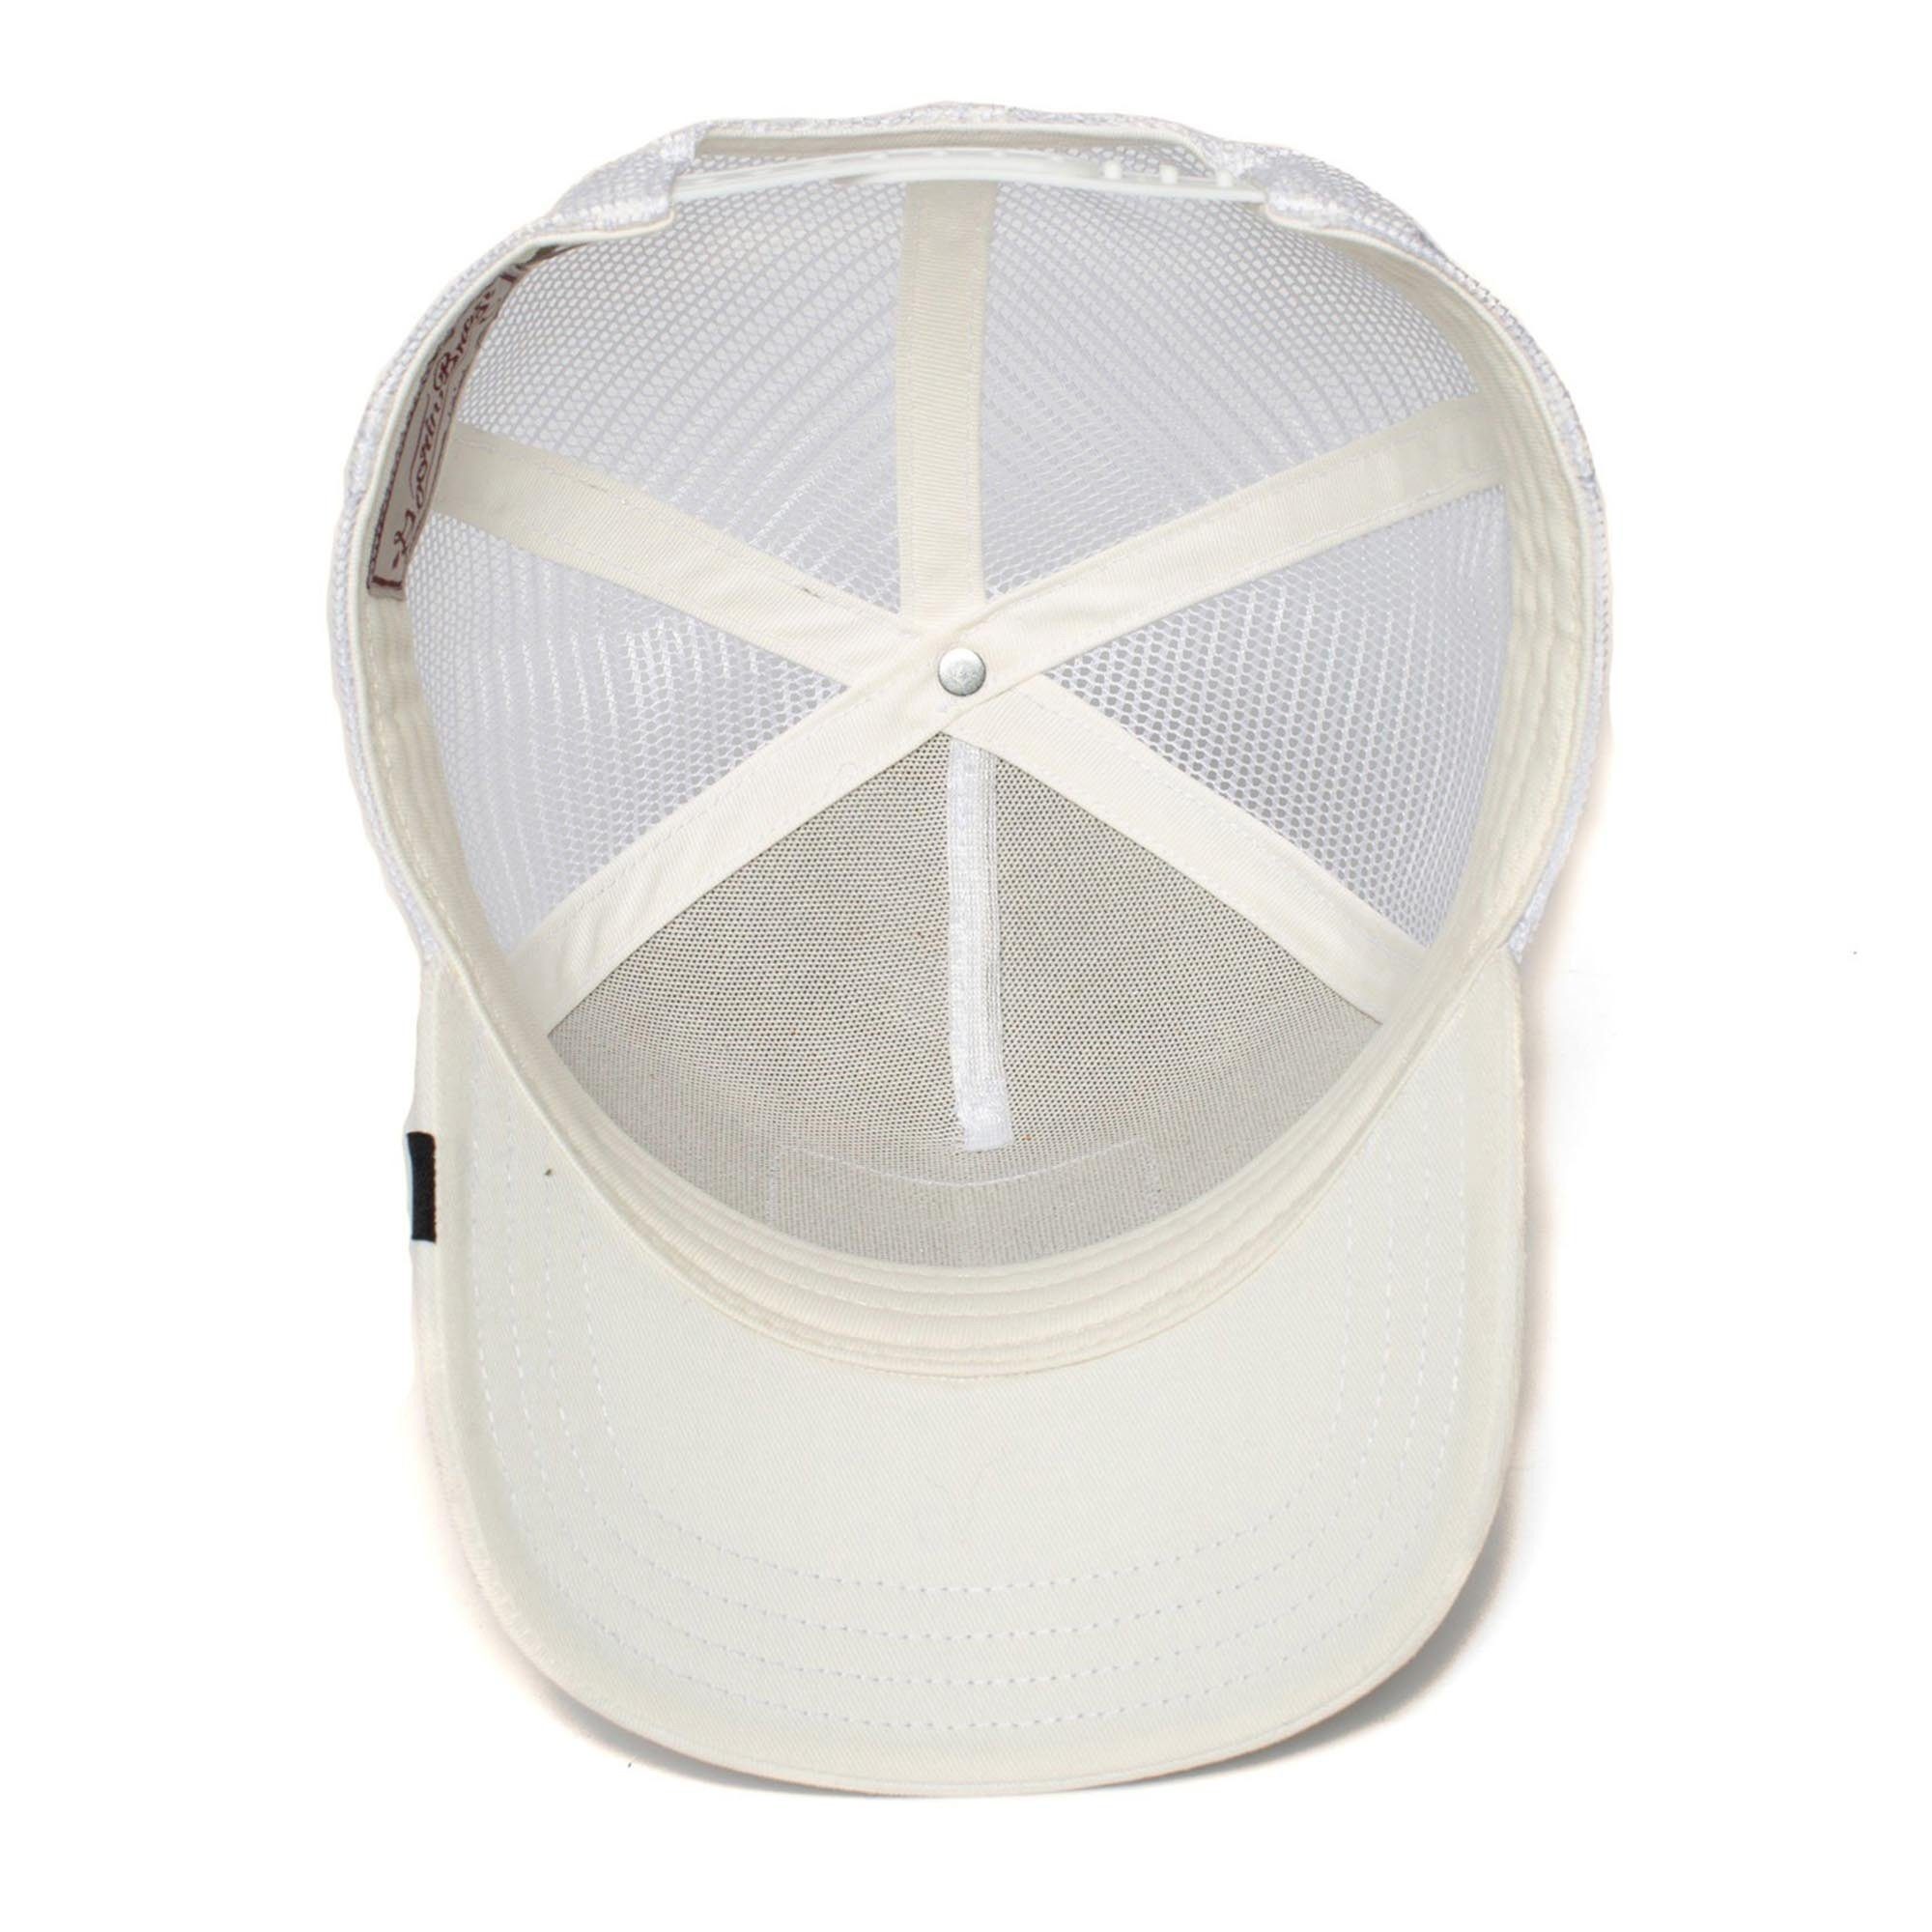 Trucker Kappe, Cap Unisex - The Bros. white Baseball Cap Size GOORIN One Frontpatch, Panther